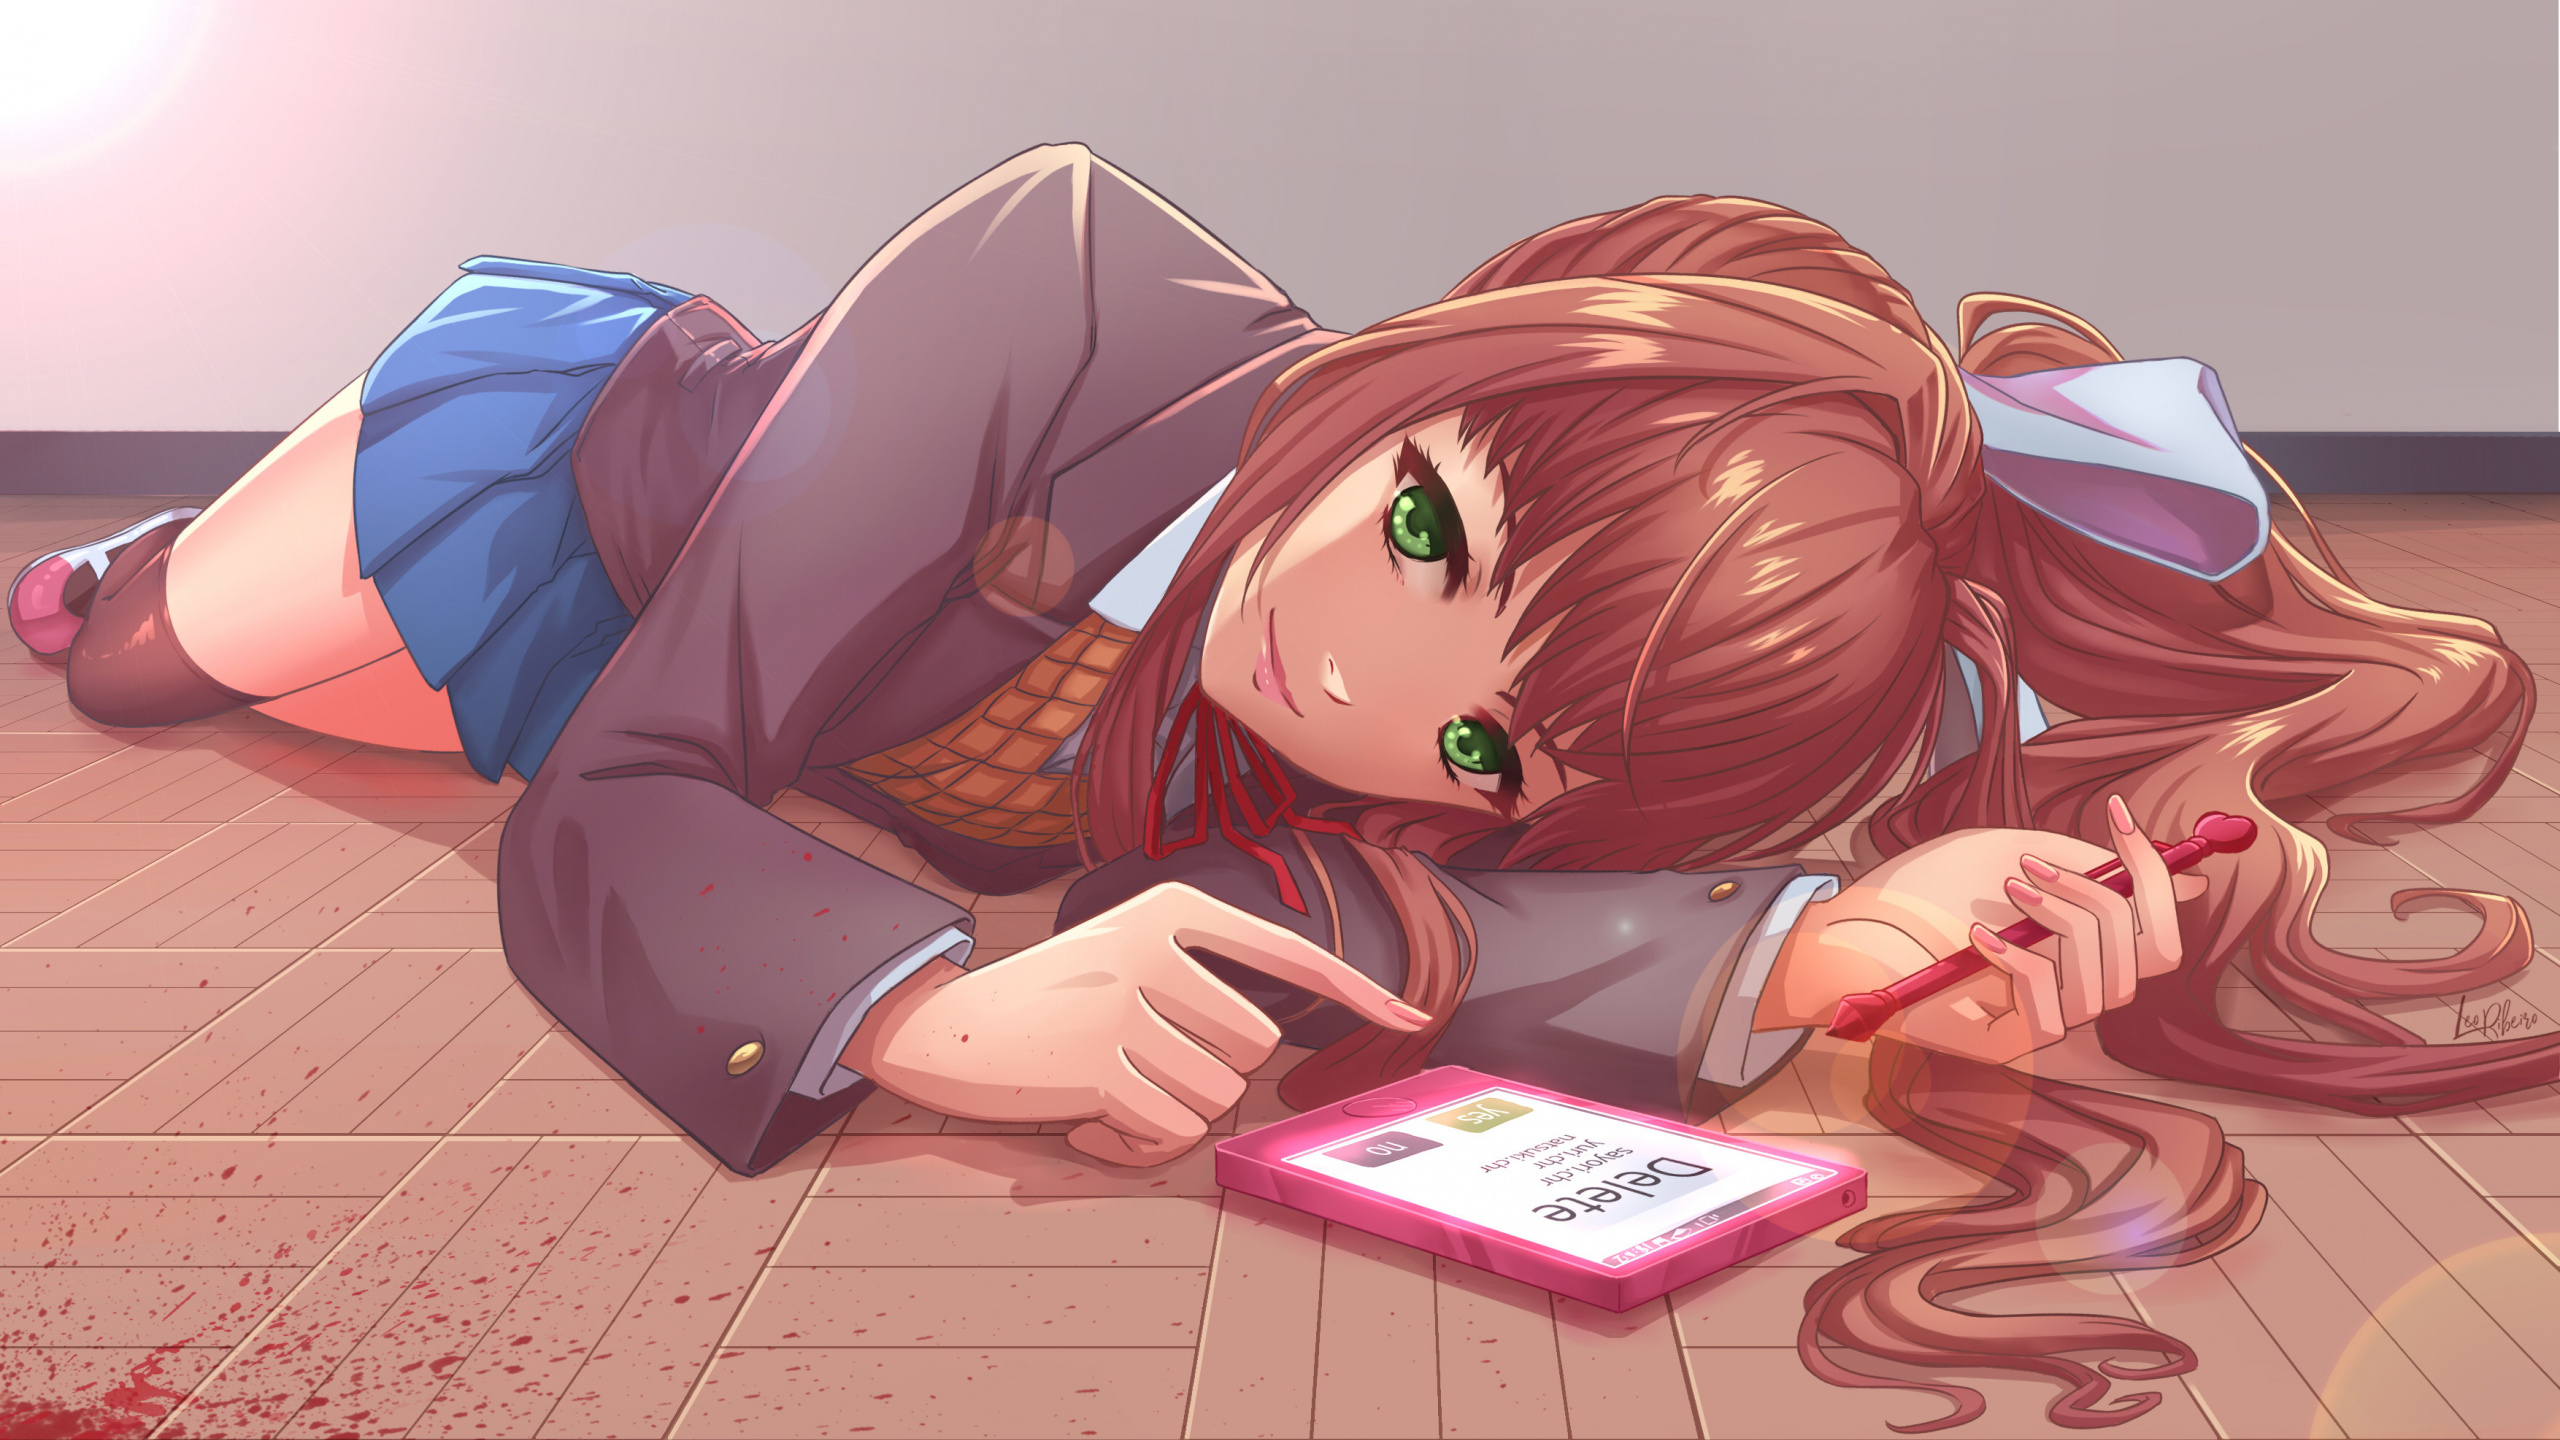 Monika Wallpapers posted by Ethan Sellers.